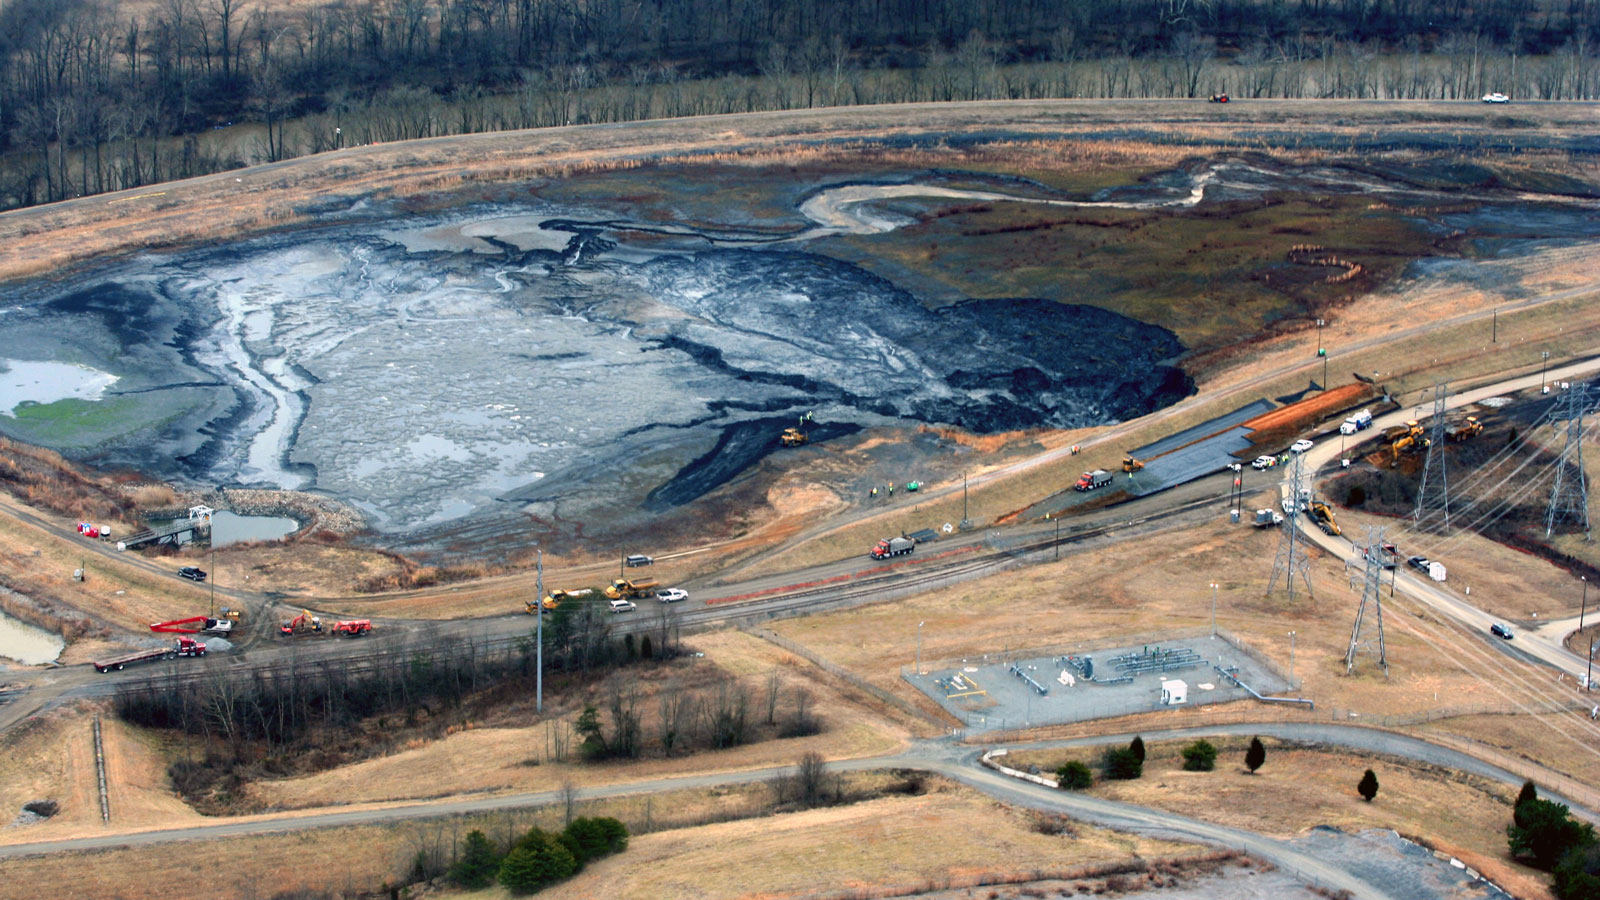 <h4>Coal ash pits</h4> <h5>In 2014, 39,000 tons of toxic coal ash and 27 million gallons of coal ash pit water spilled into the Dan River in North Carolina after a pipe burst at the Dan River Steam Station.</h5><em>Waterkeeper Alliance/Rick Dove on Flickr (CC BY-NC 2.0)</em>